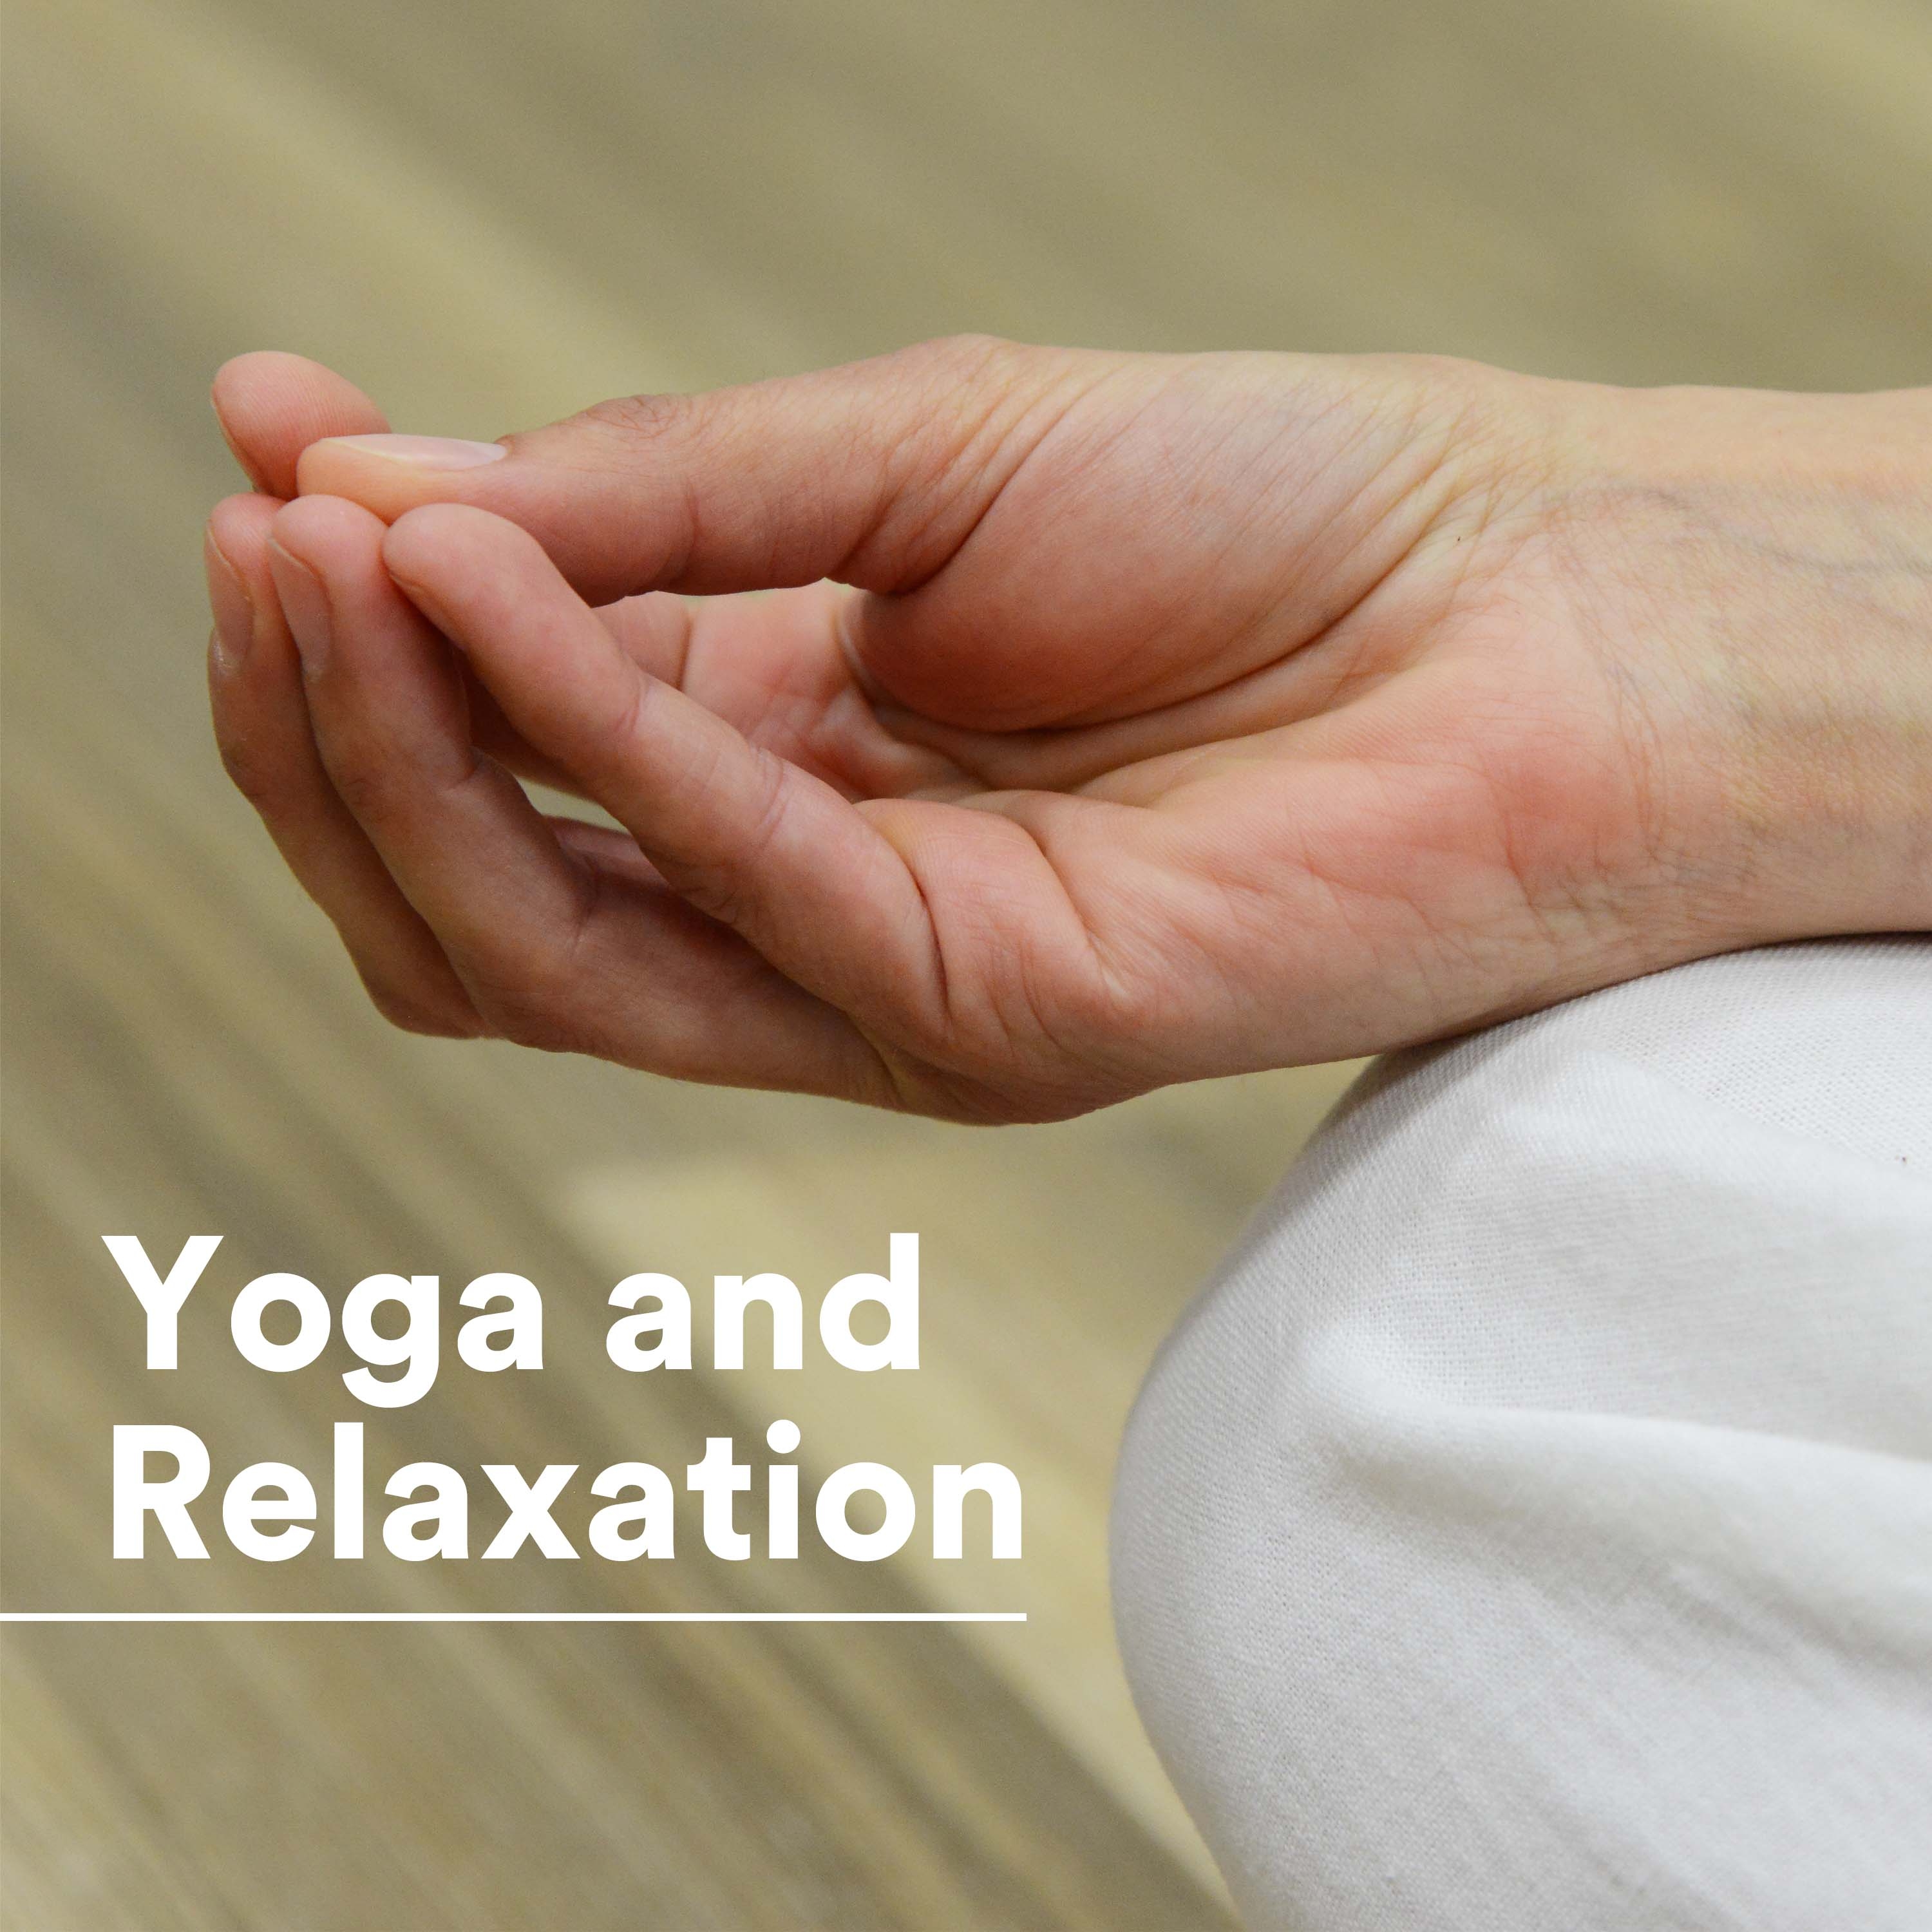 Yoga and Relaxation